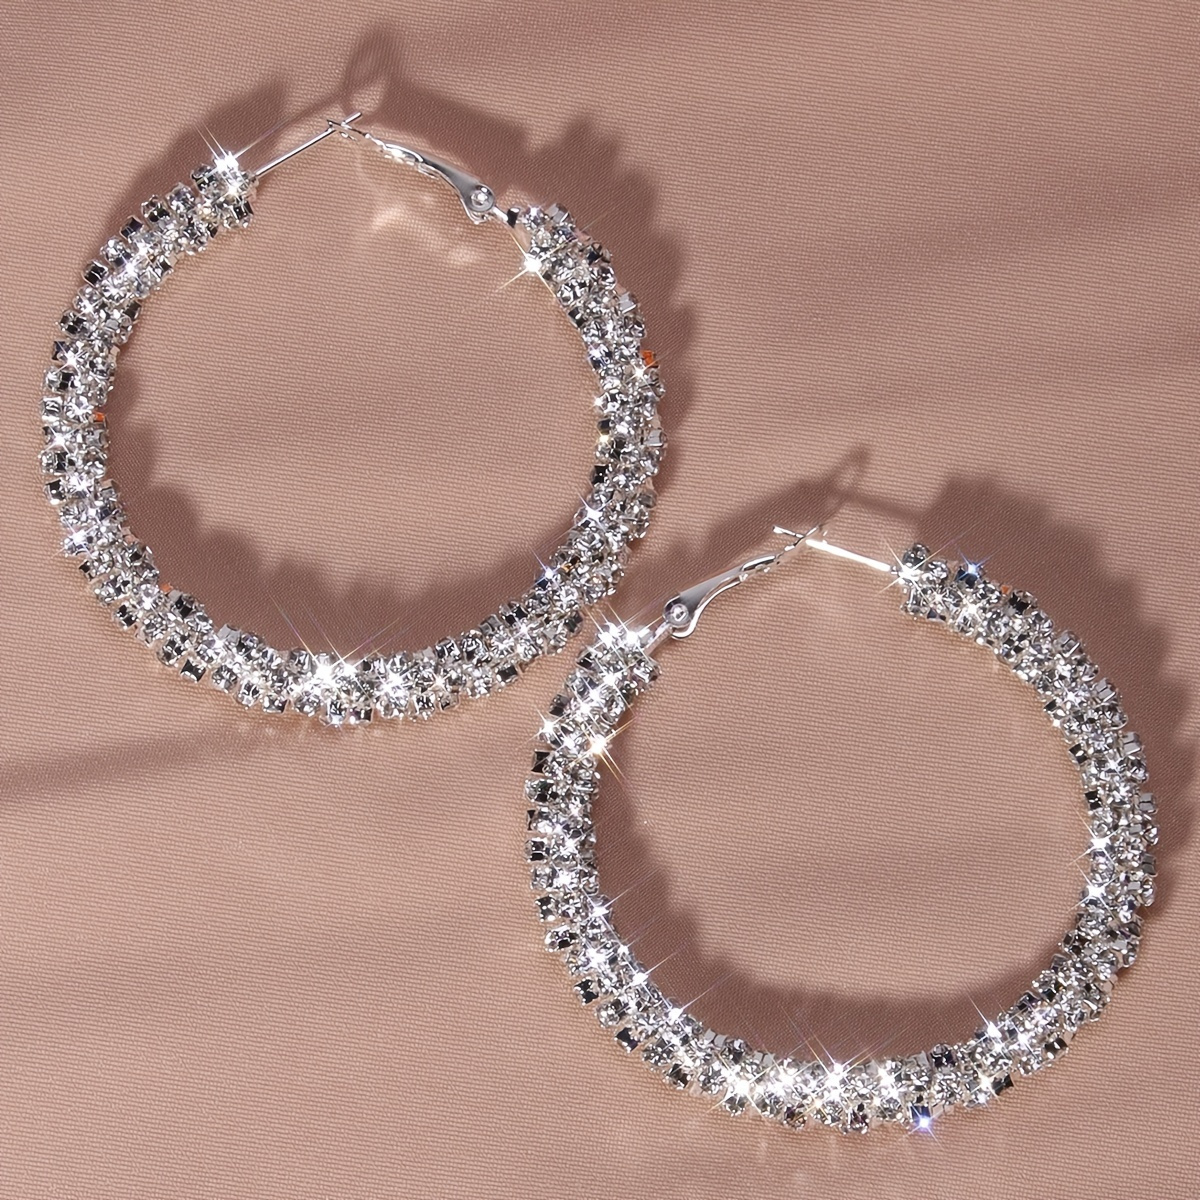 

Large Full Rhinestone Hoop Earrings Silver Plated Delicate Jewelry Party Holiday Gift For Women